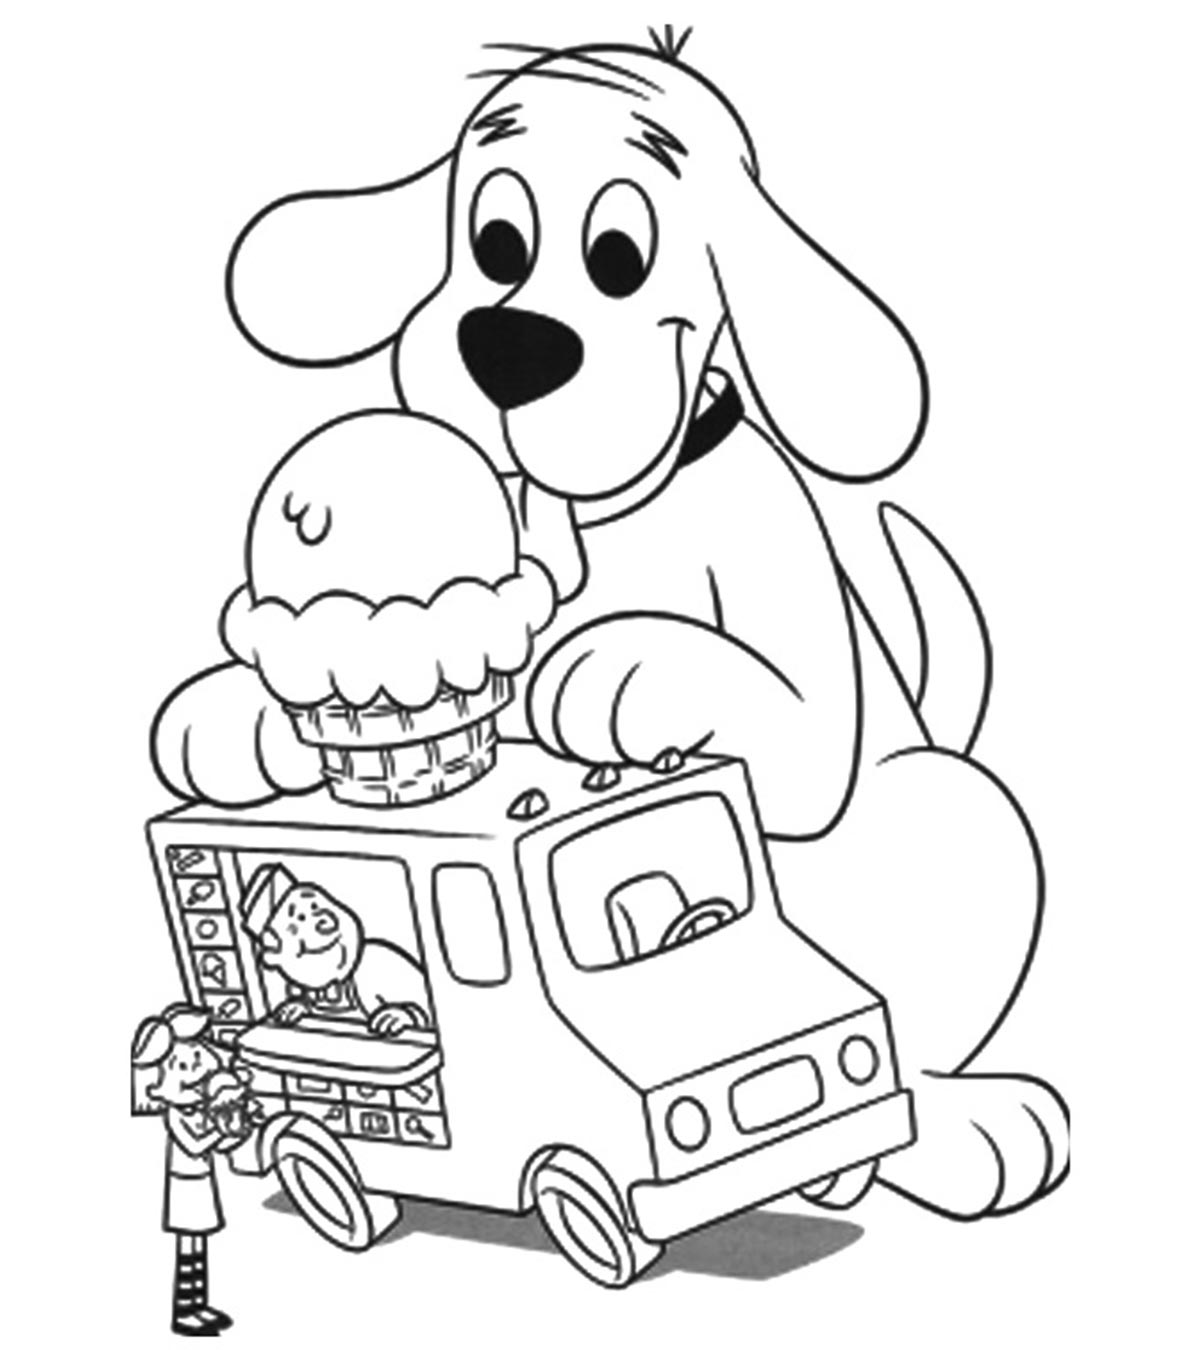 25 Yummy Ice Cream Coloring Pages Your Toddler Will Love_image